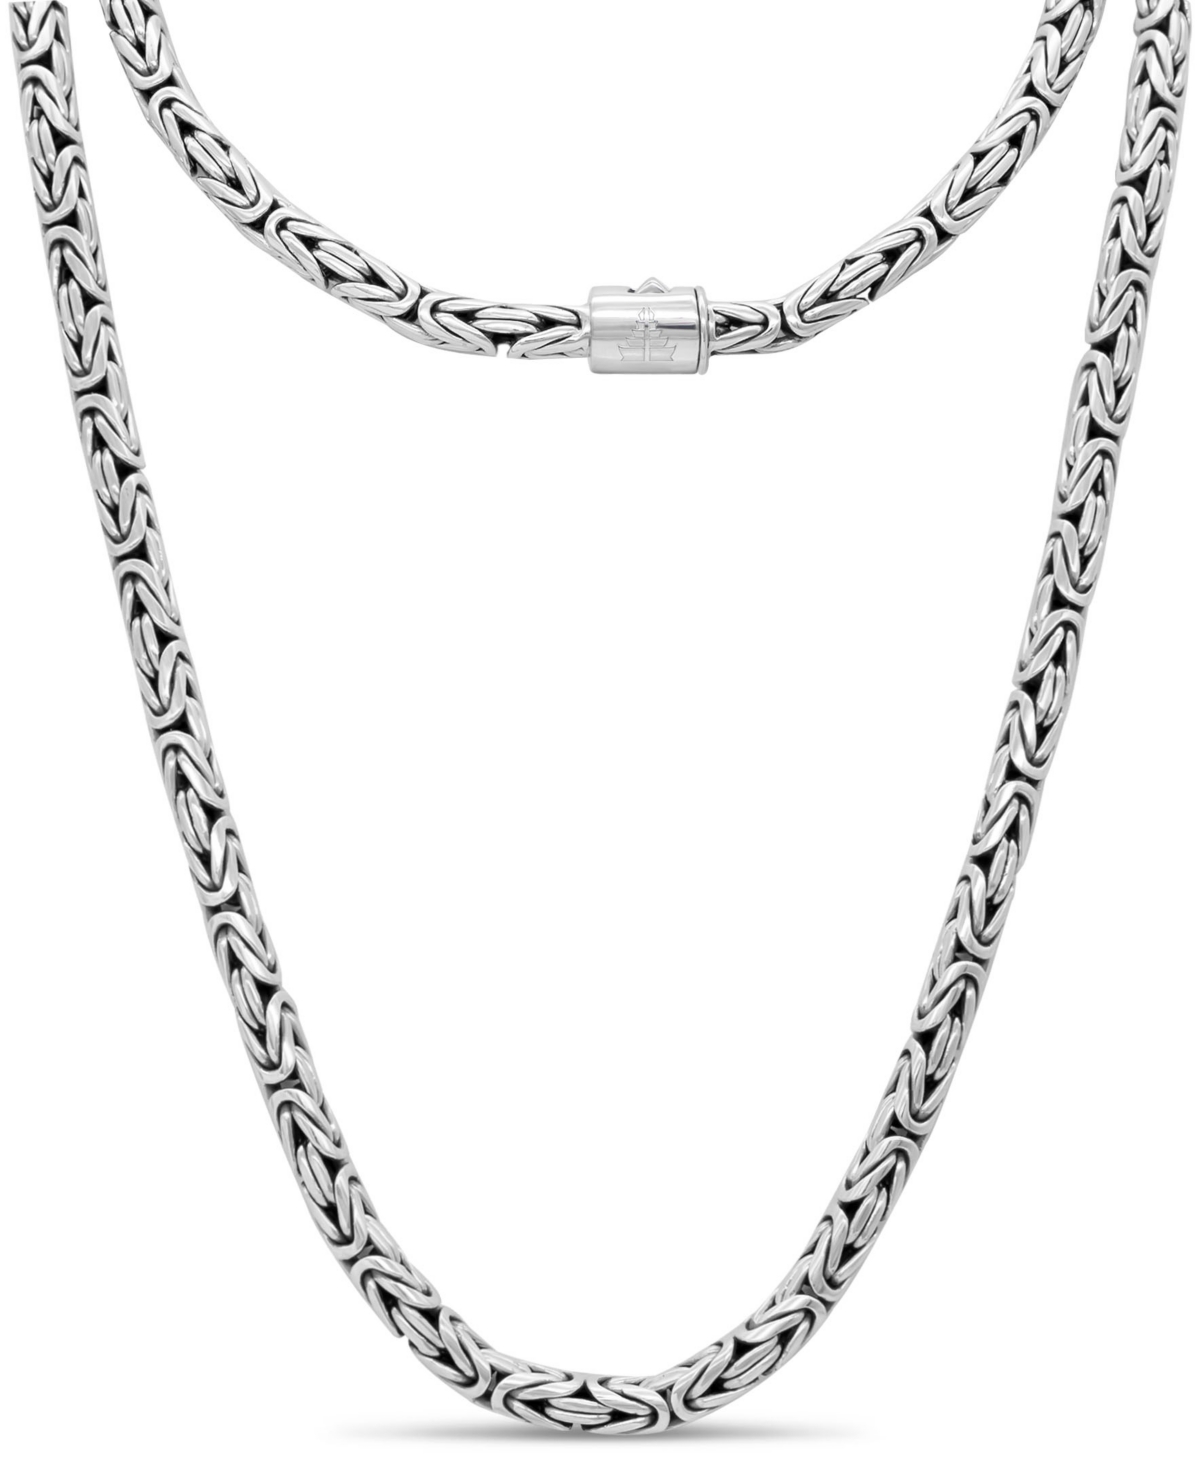 Borobudur Round 5mm Chain Necklace in Sterling Silver - Silver